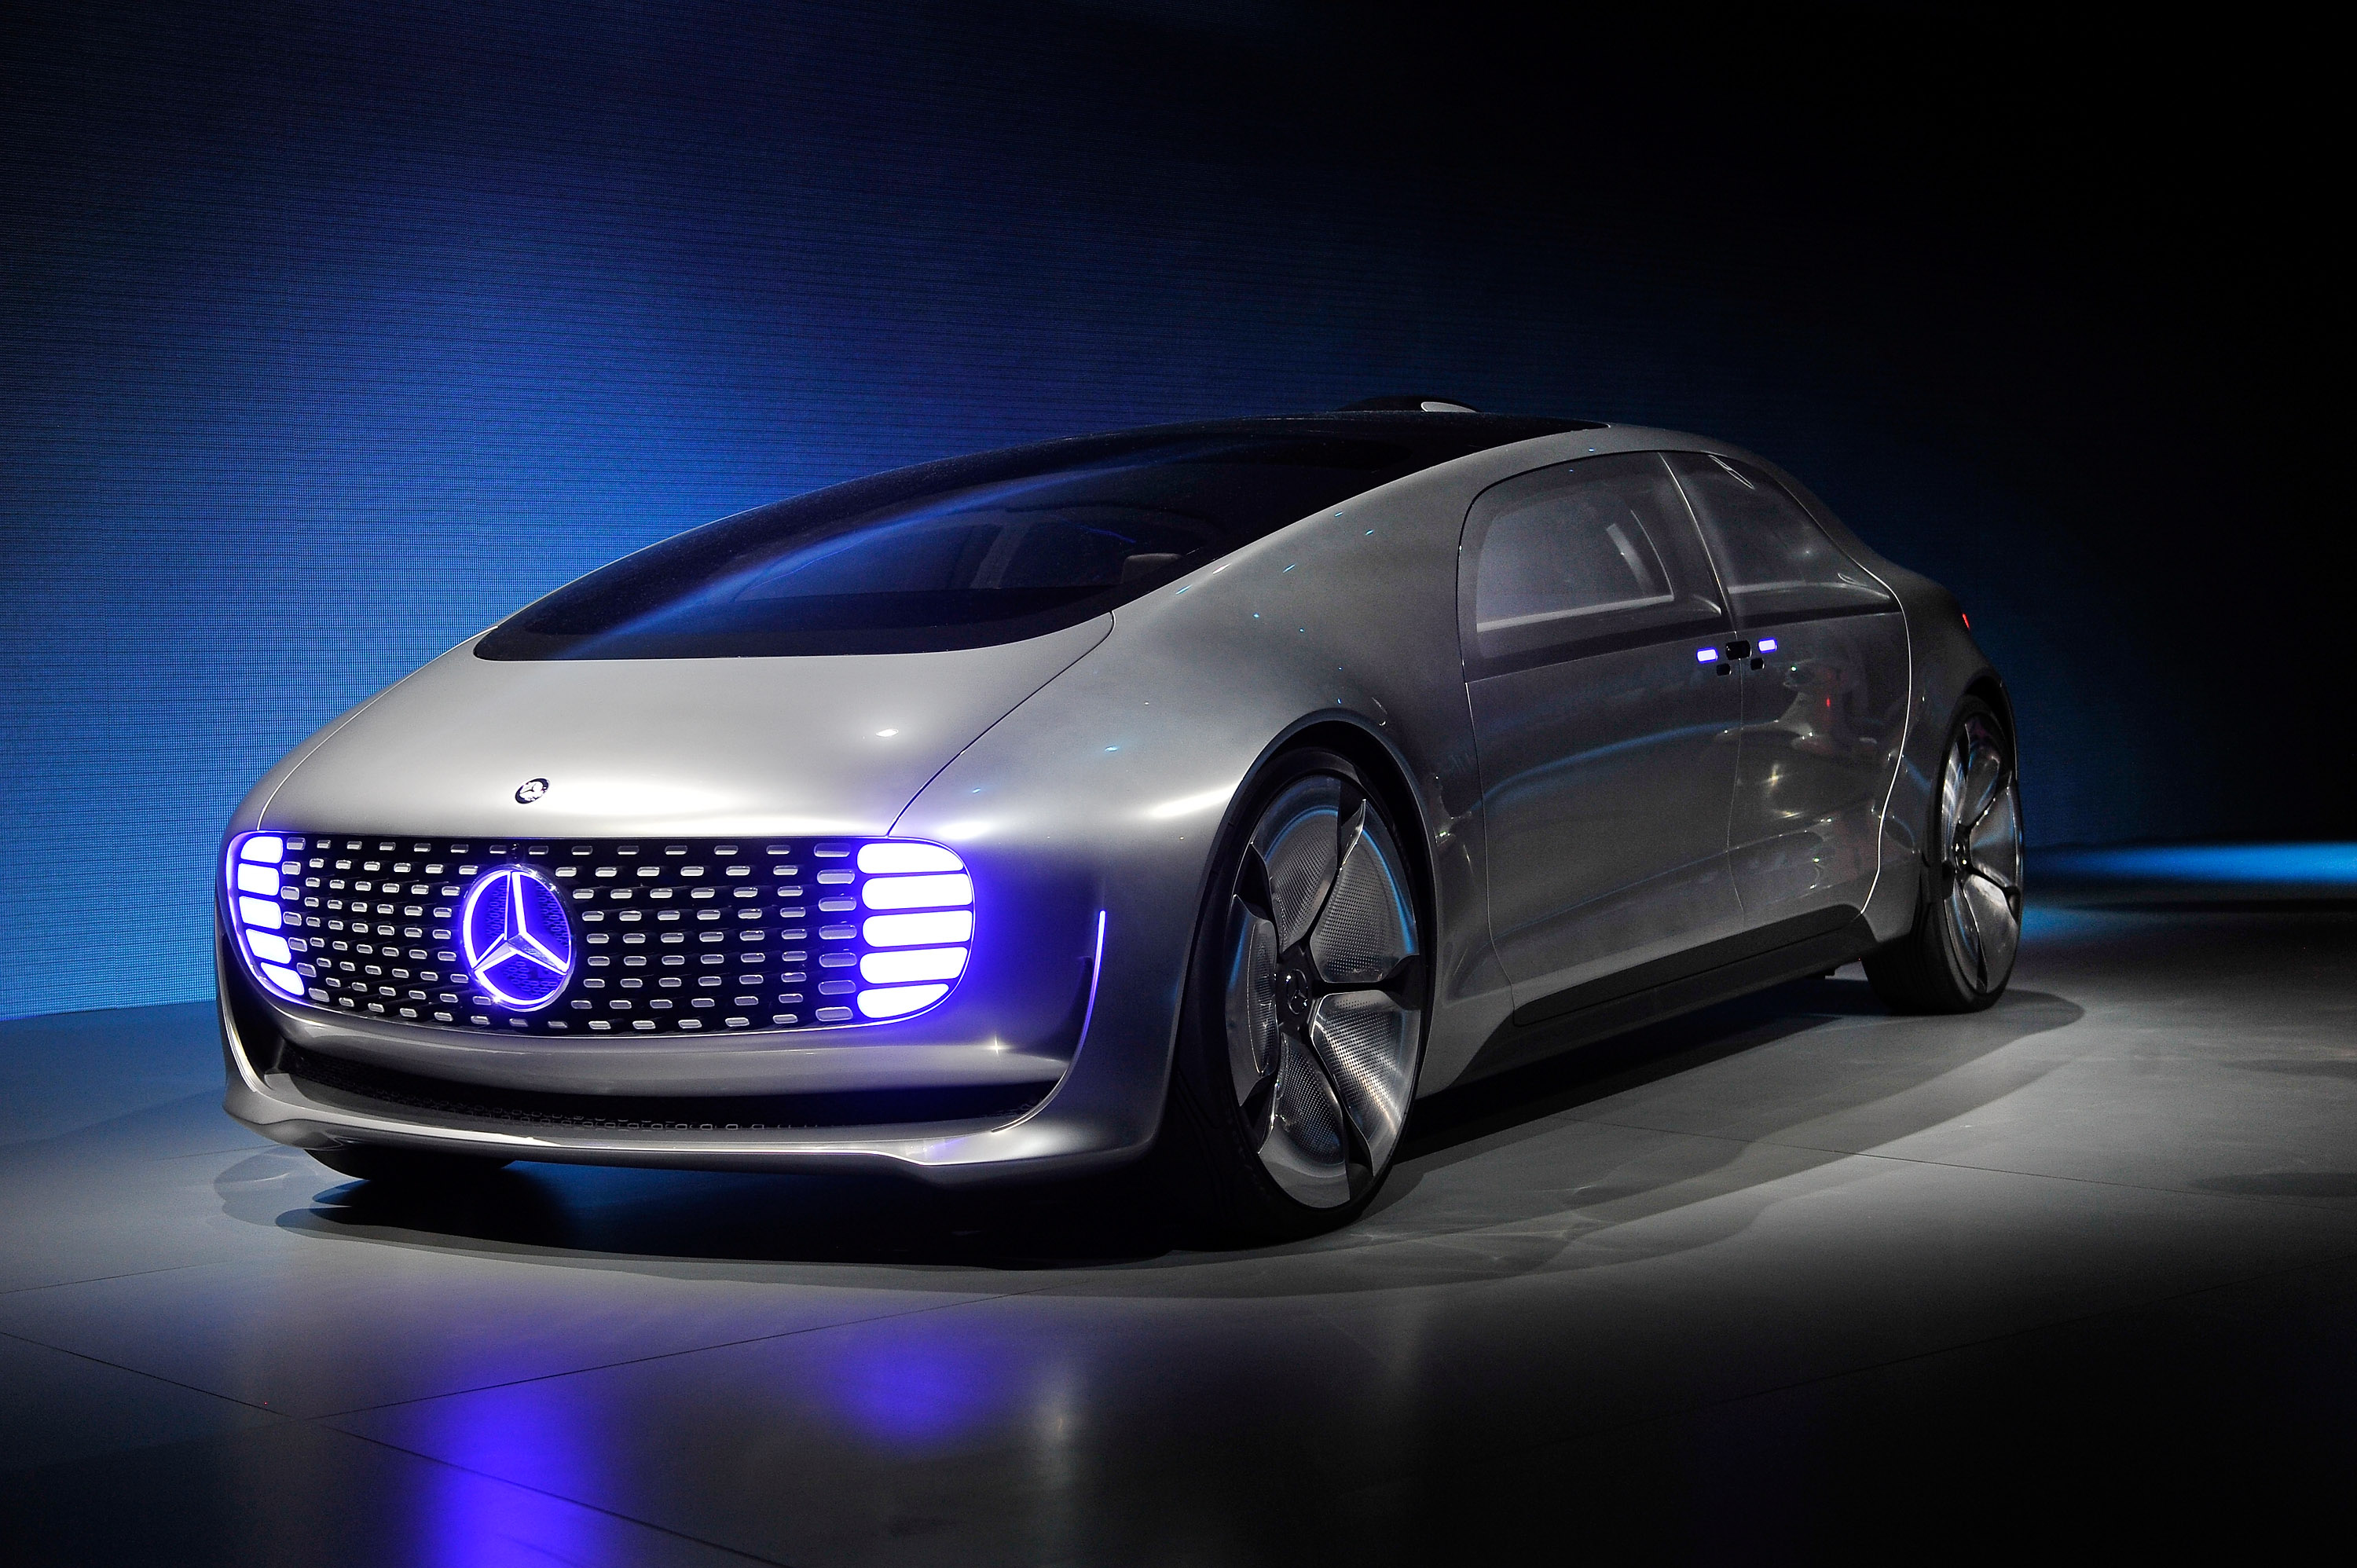 A Mercedes-Benz  F 015 autonomous driving automobile is displayed at the Mercedes-Benz press event at The Chelsea at The Cosmopolitan of Las Vegas for the 2015 International CES on January 5, 2015 in Las Vegas, Nevada. (David Becker&mdash;Getty Images)